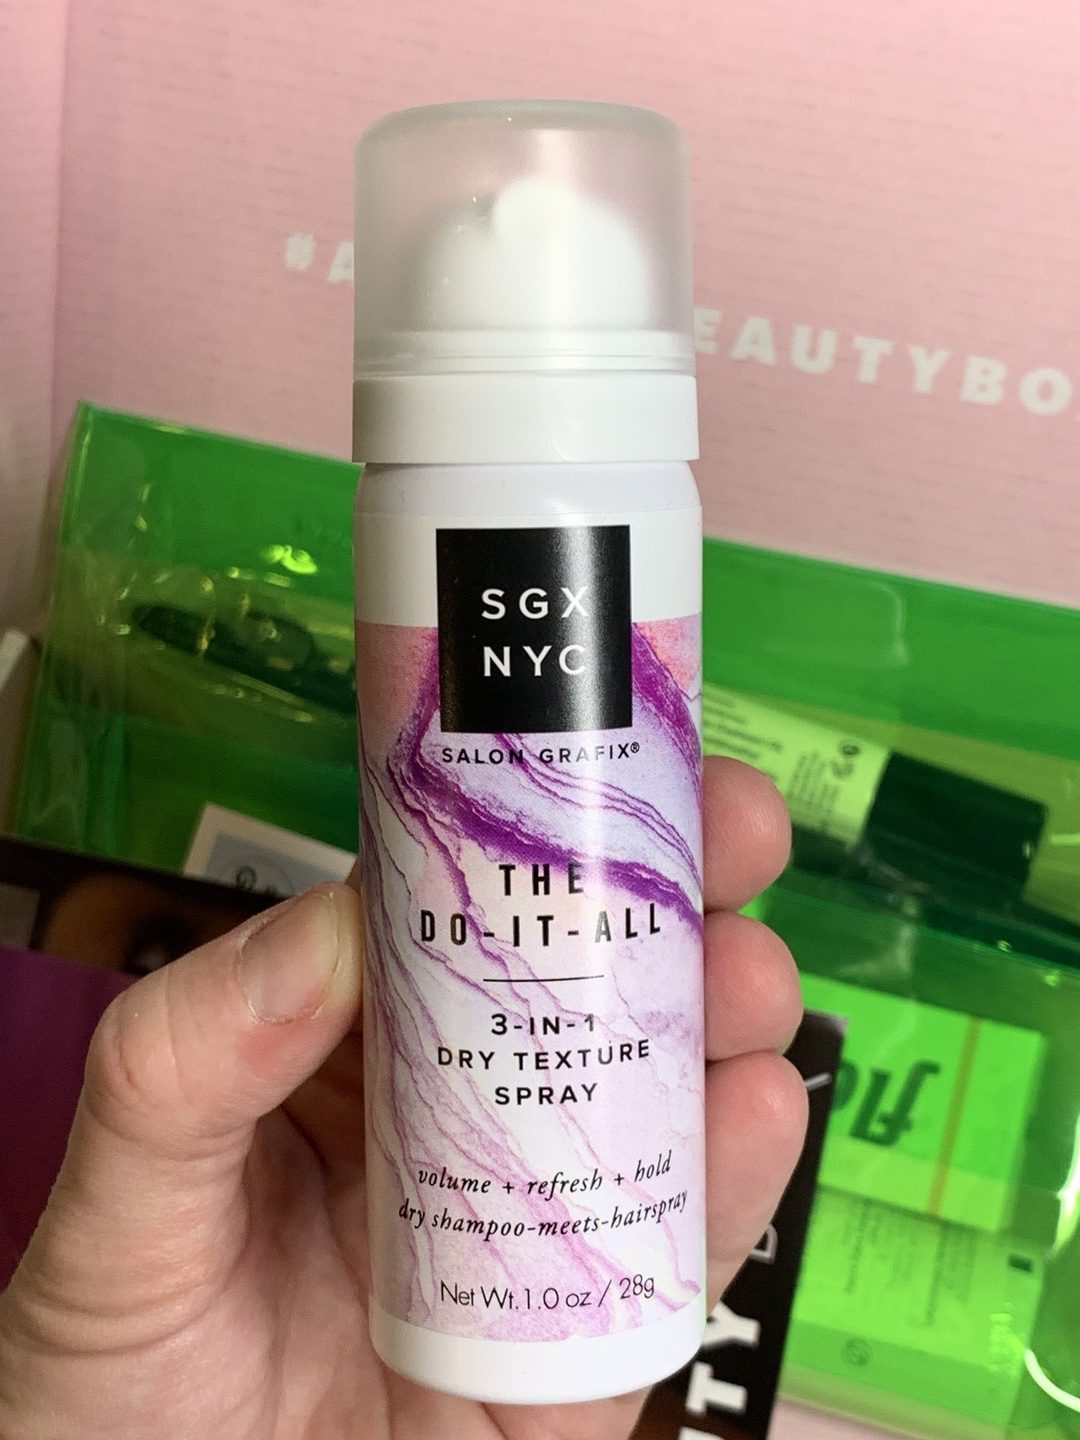 SGX NYC’s Do-It-All 3-in-1 Dry Texture Spray